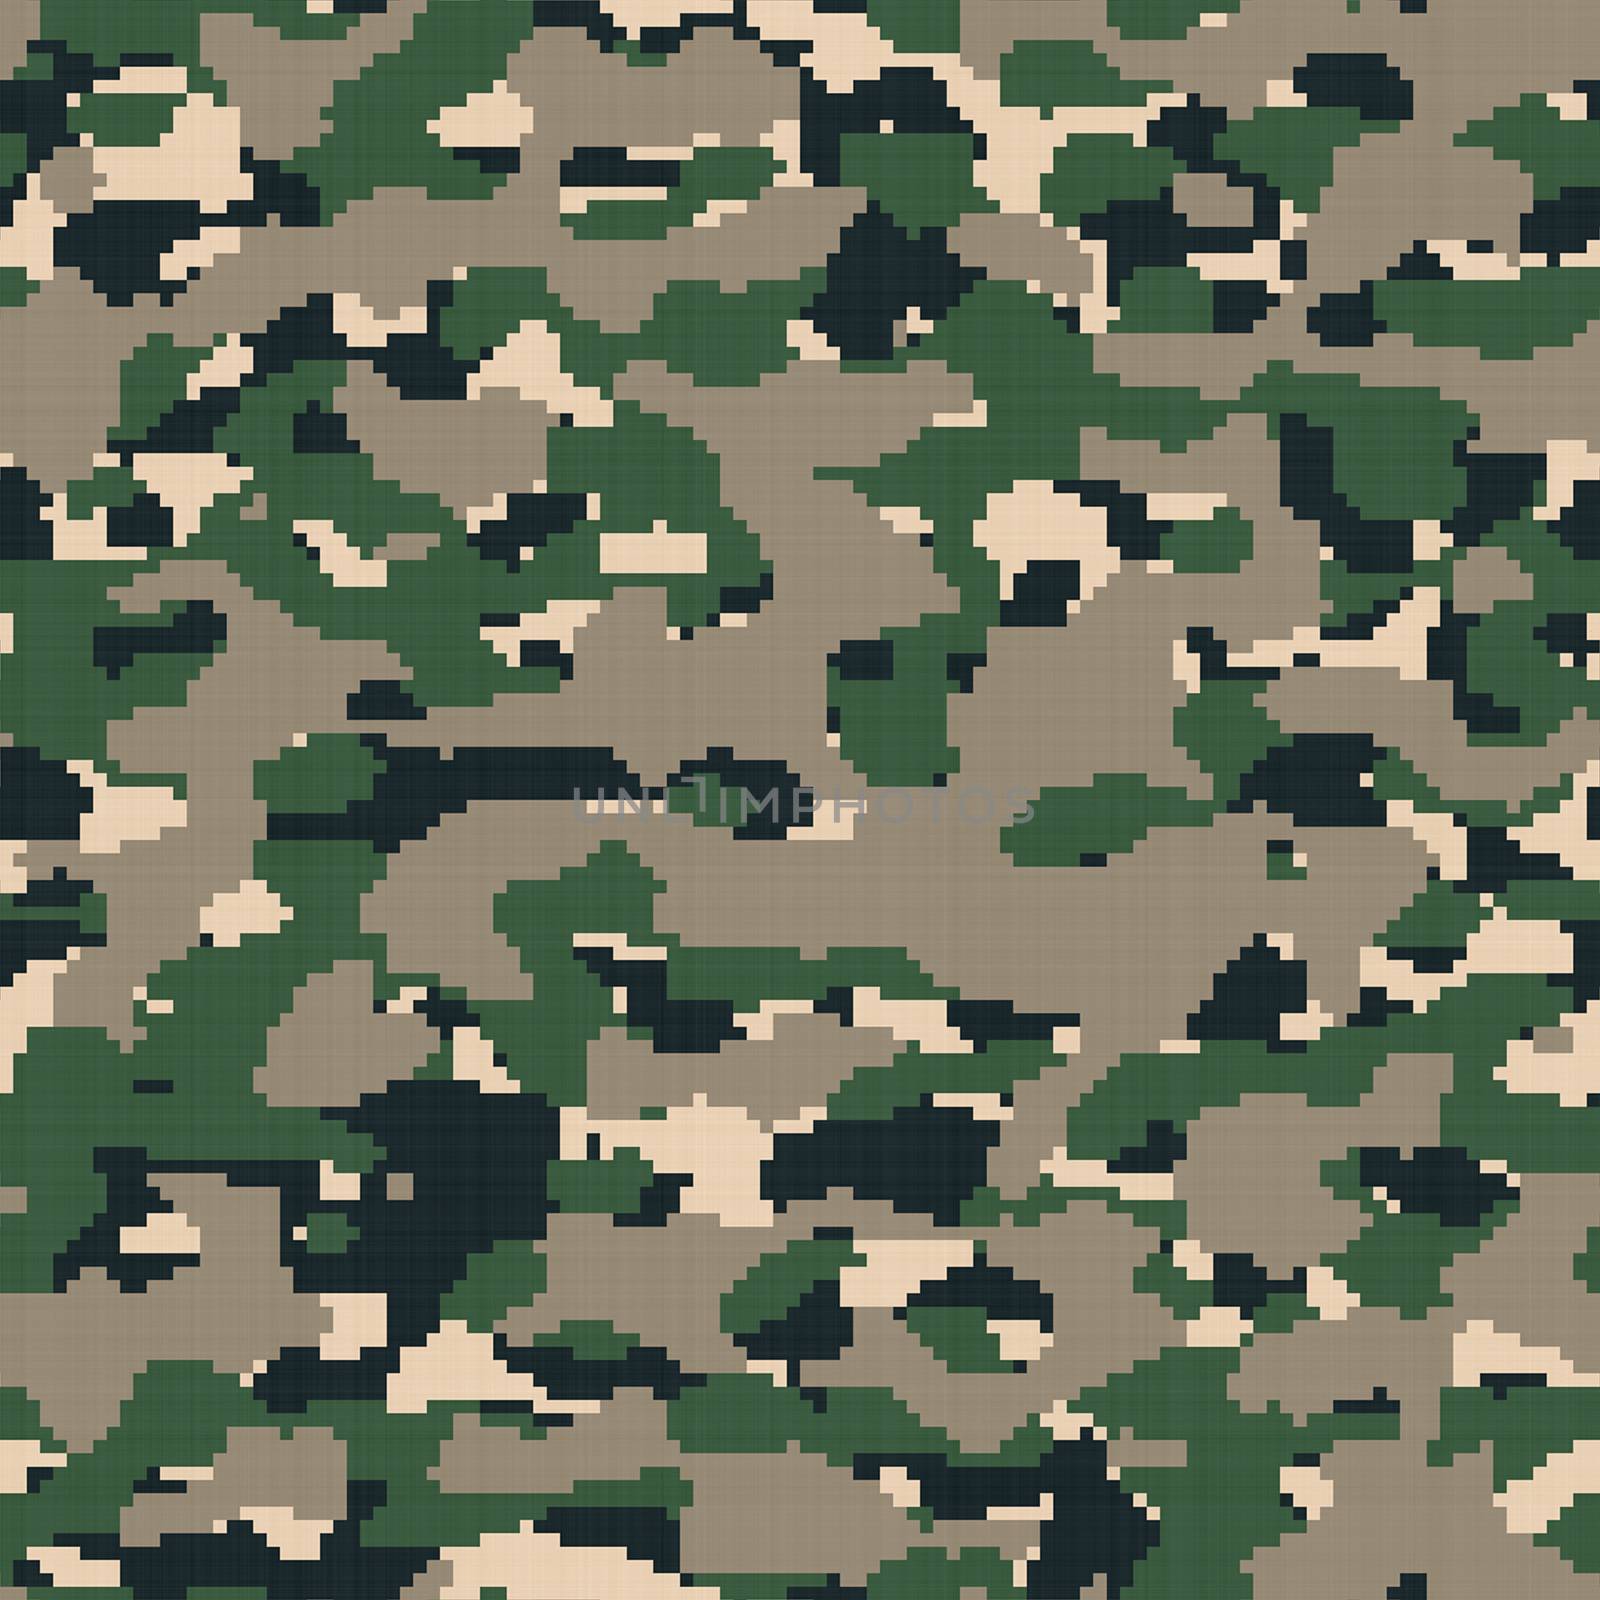 Digital Army Camouflage by graficallyminded